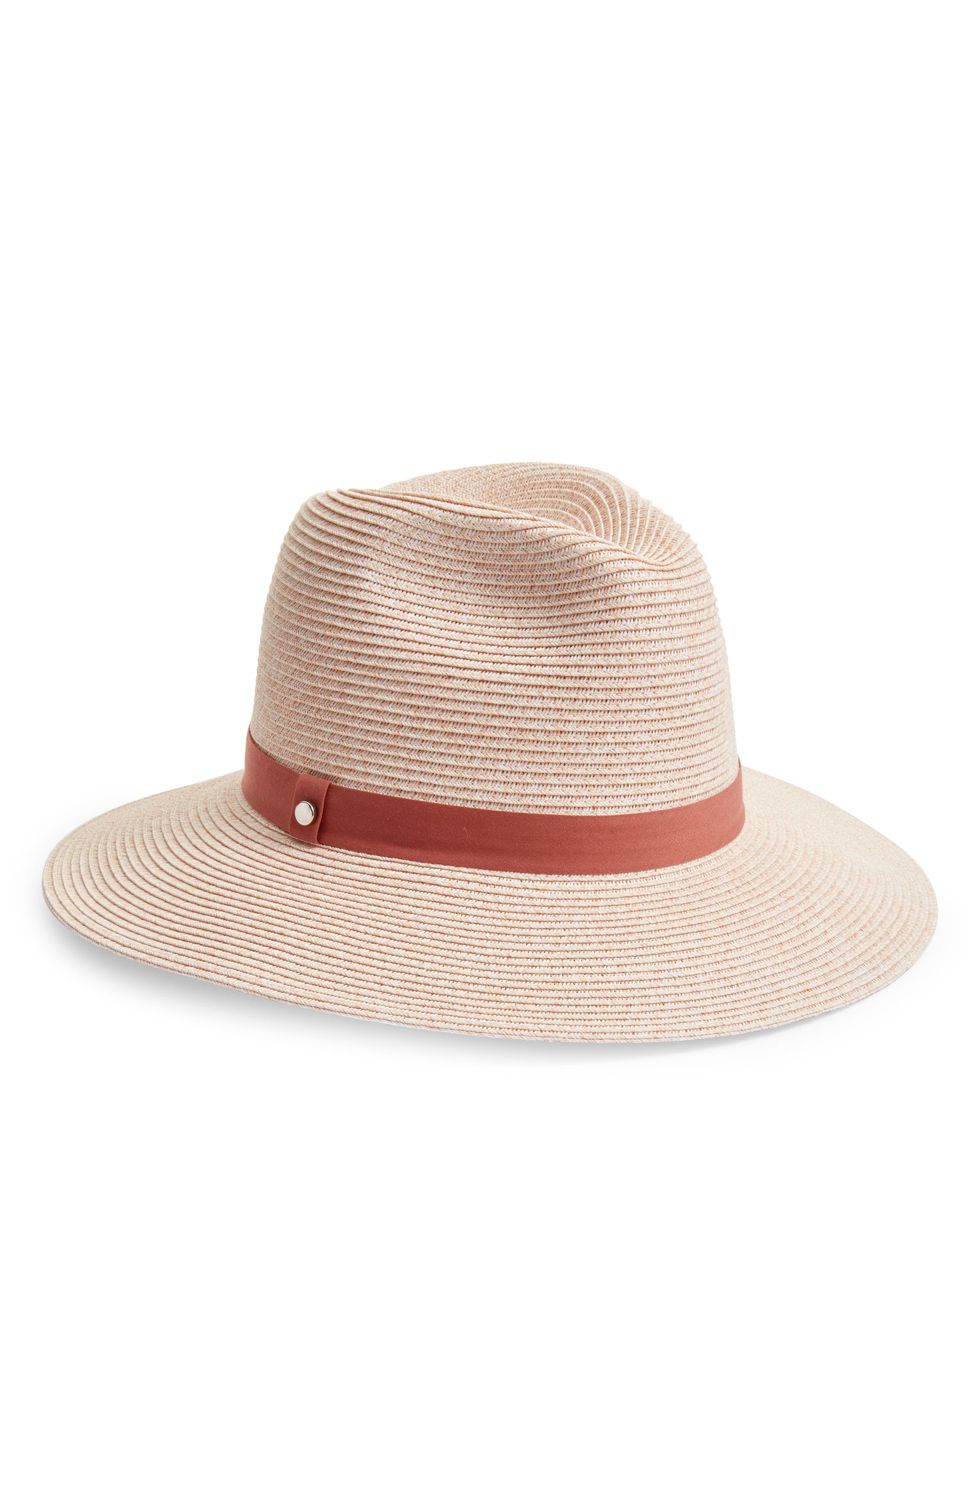 Packable Paper Straw Panama Hat